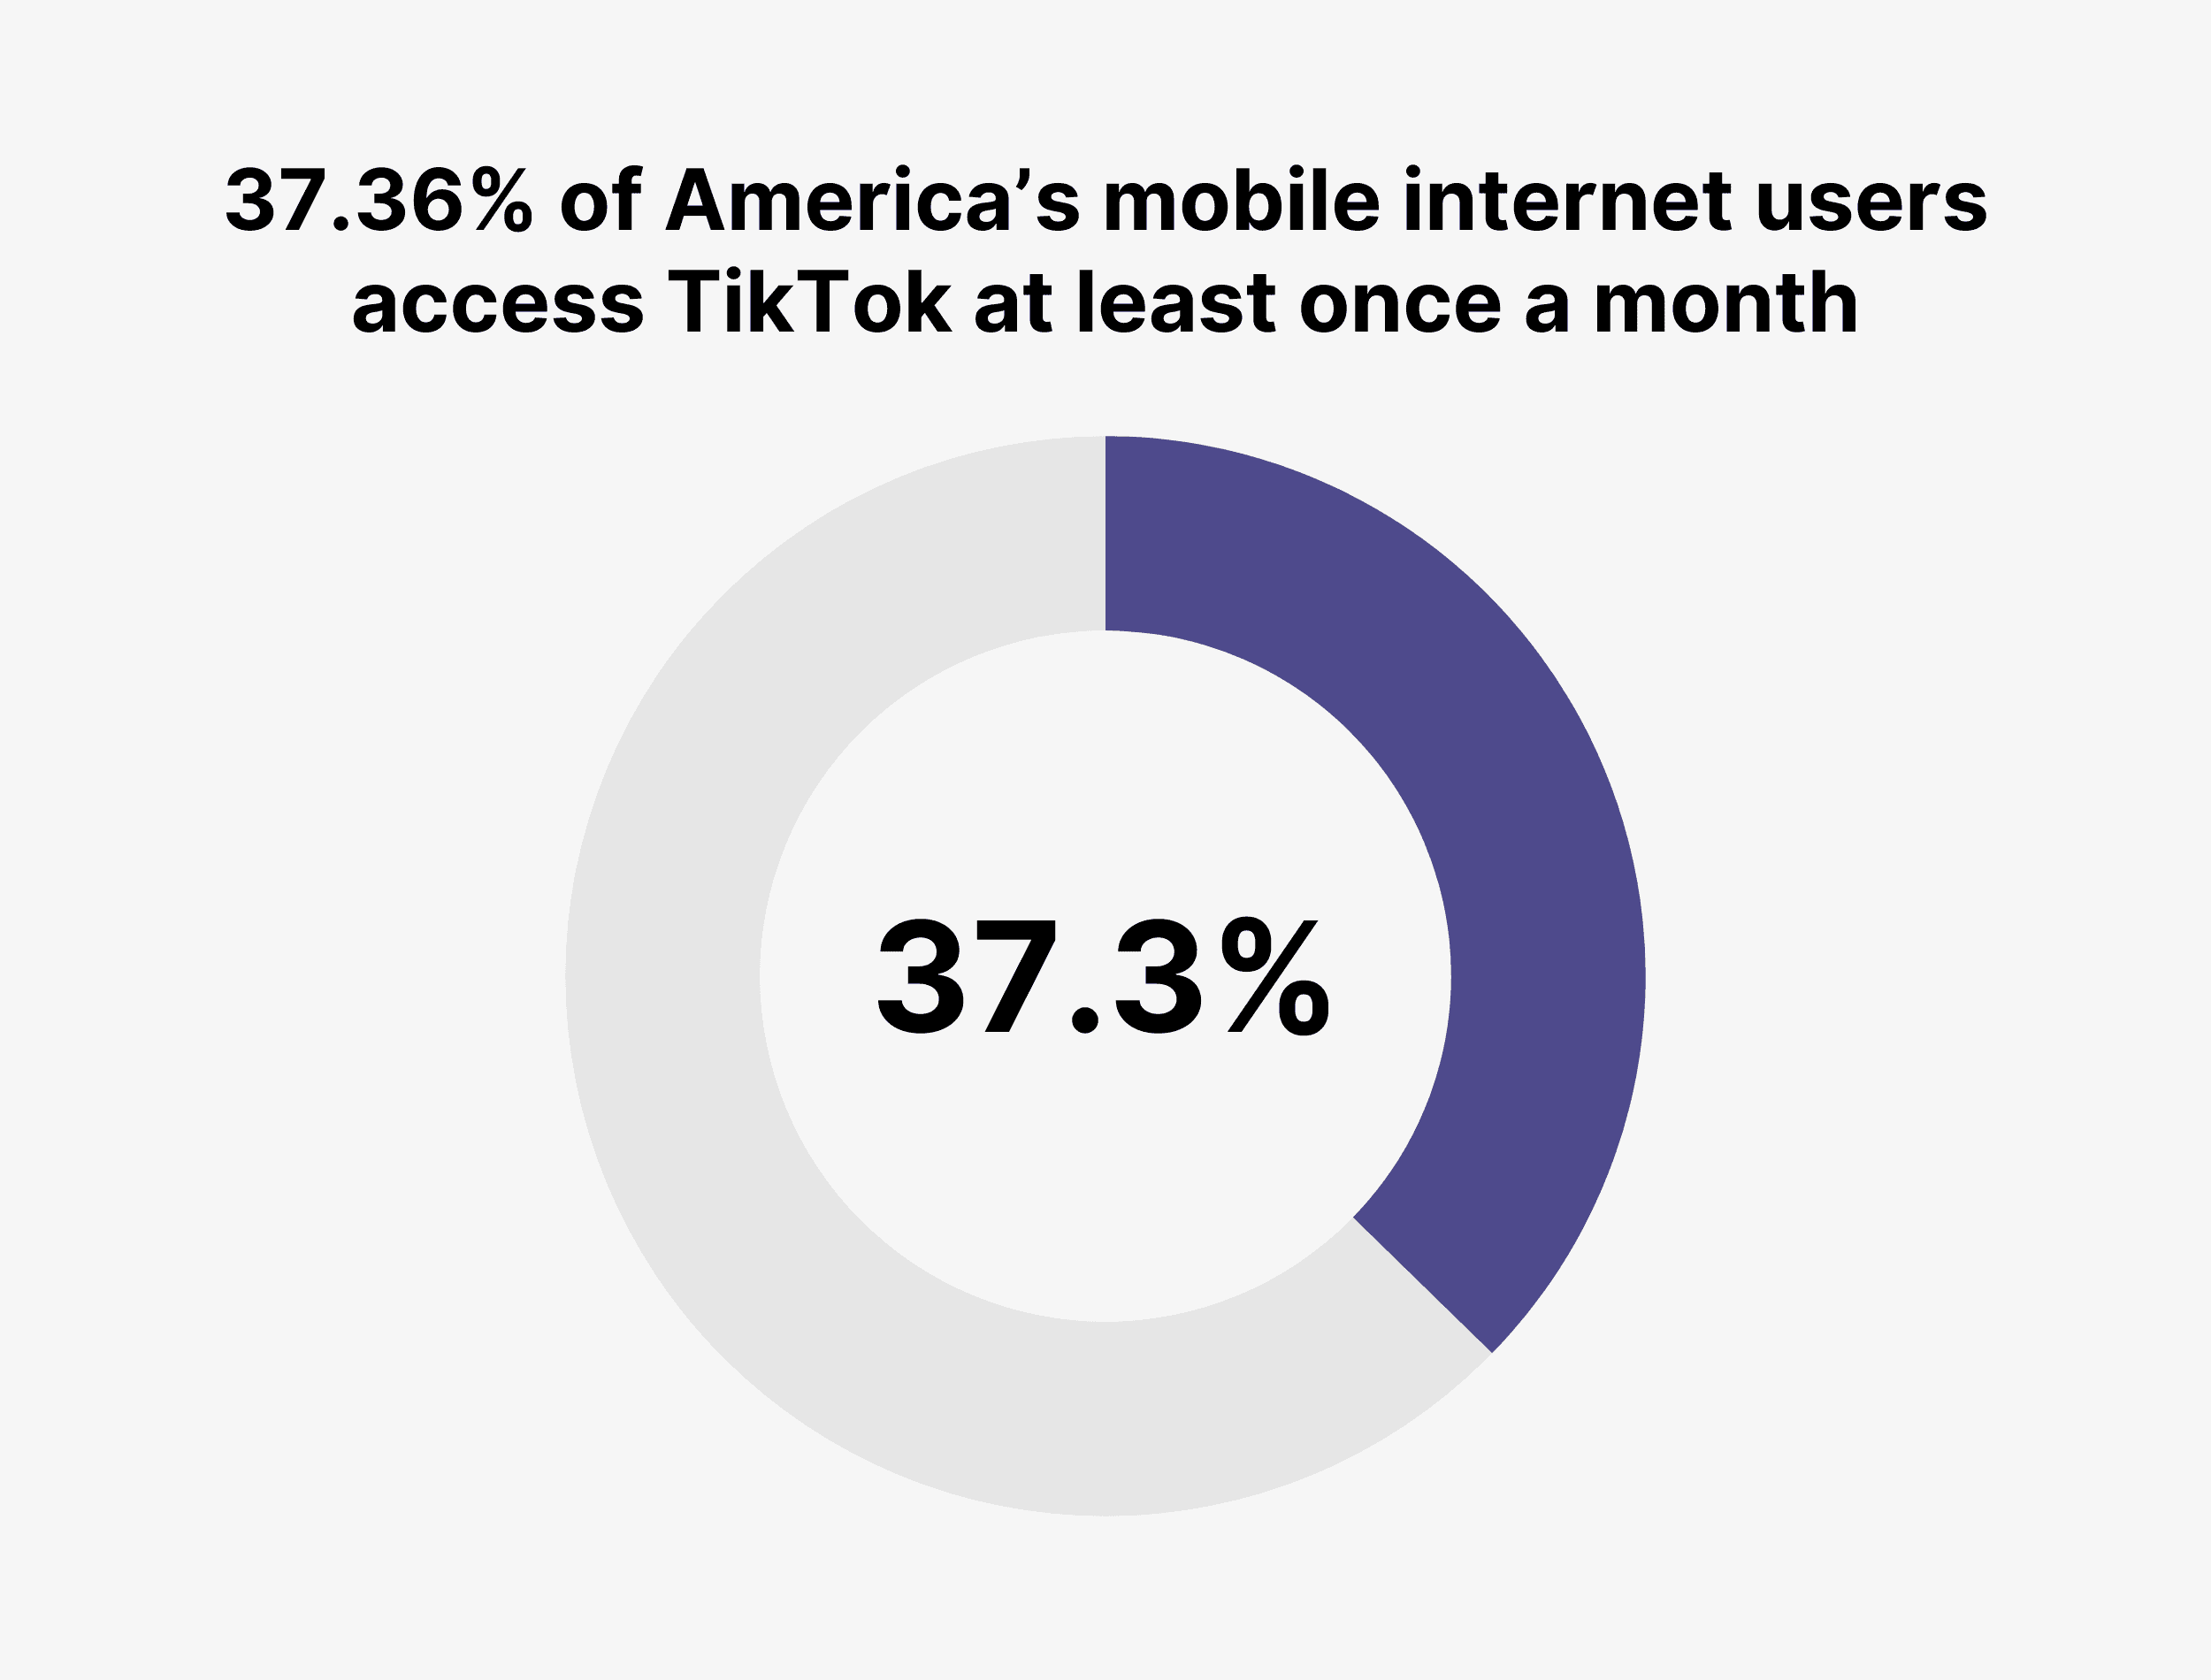 37.36% of America’s mobile internet users access TikTok at least once a month